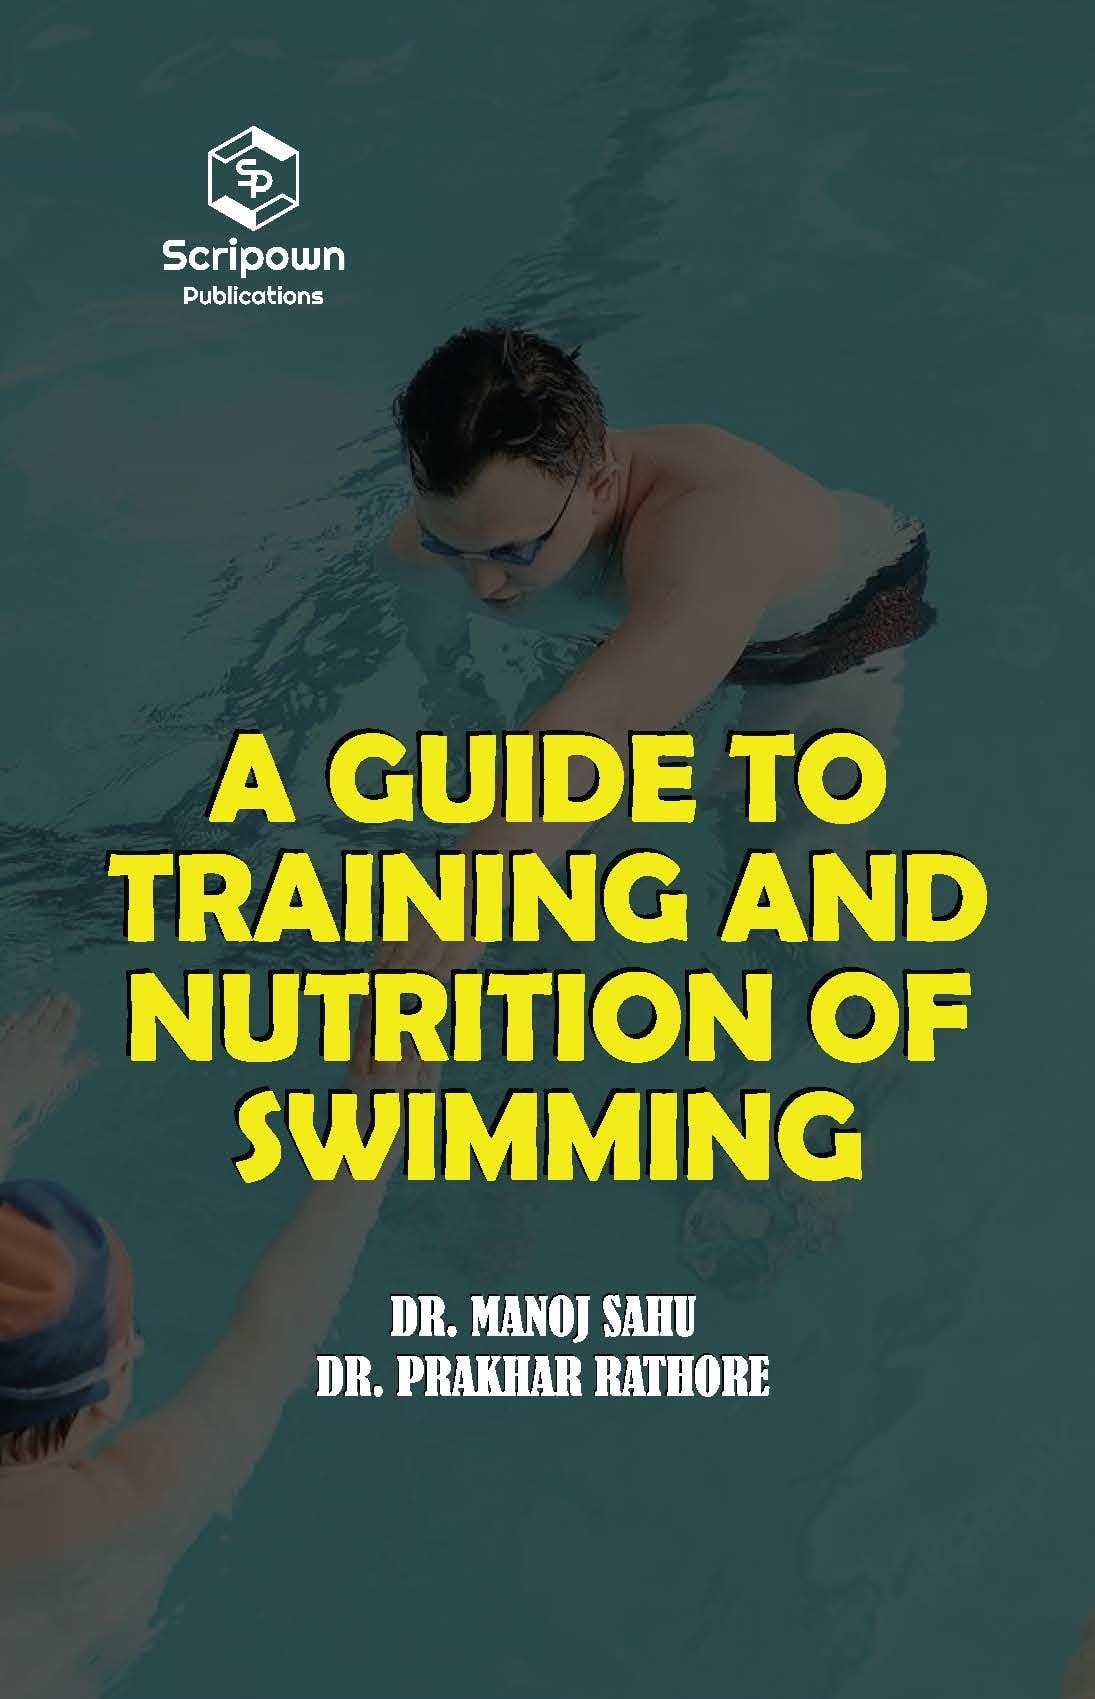 A Guide to Training and Nutrition of Swimming